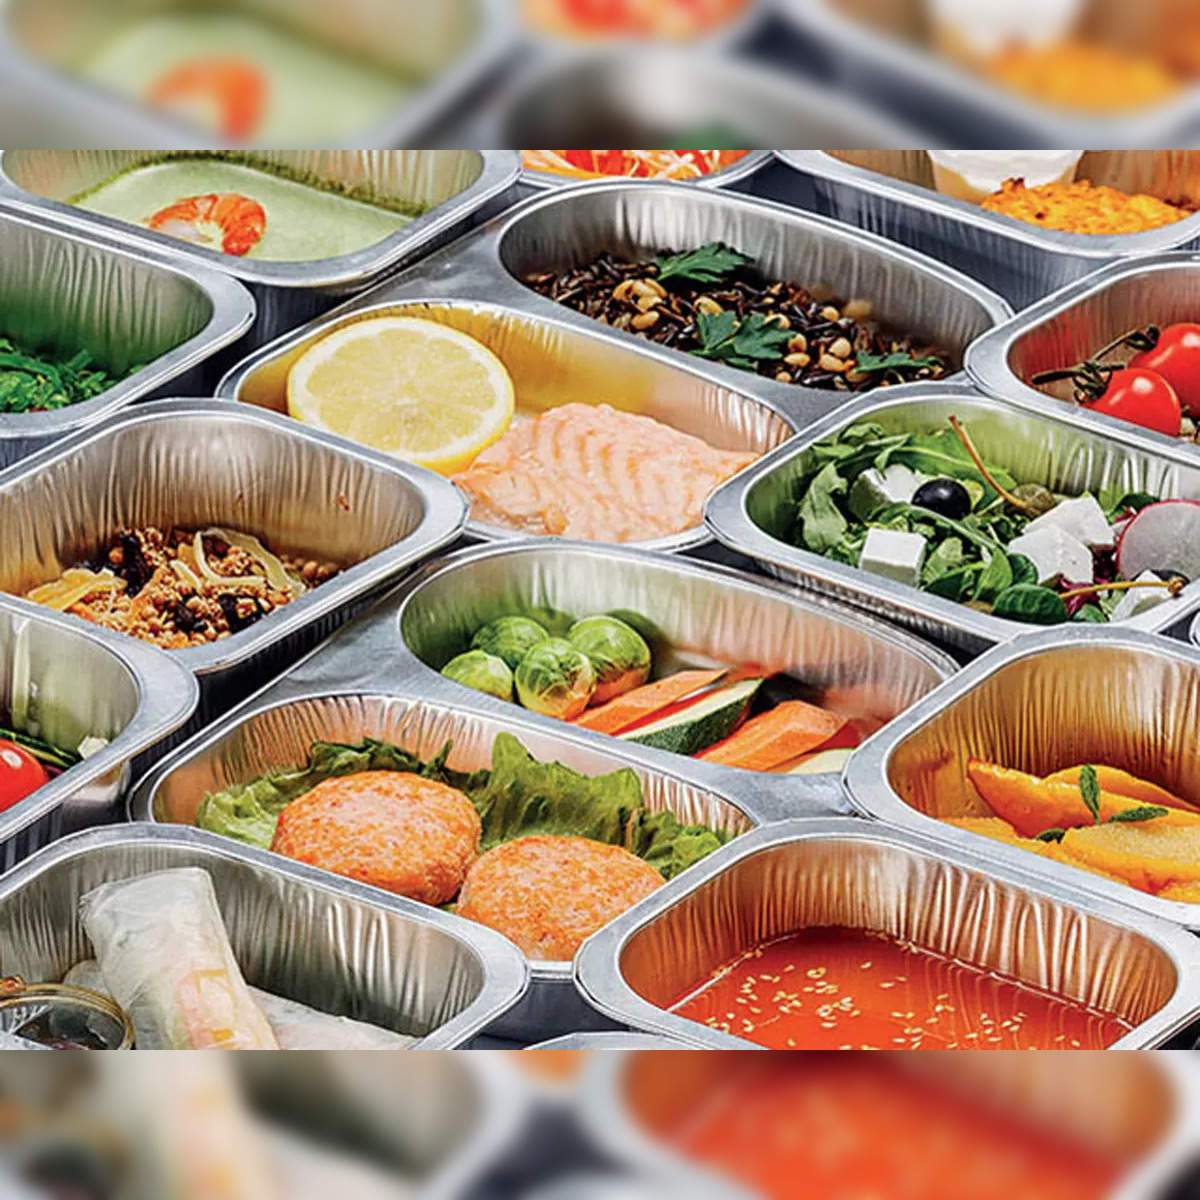 Should restaurants allow guests to bring their own takeout containers?